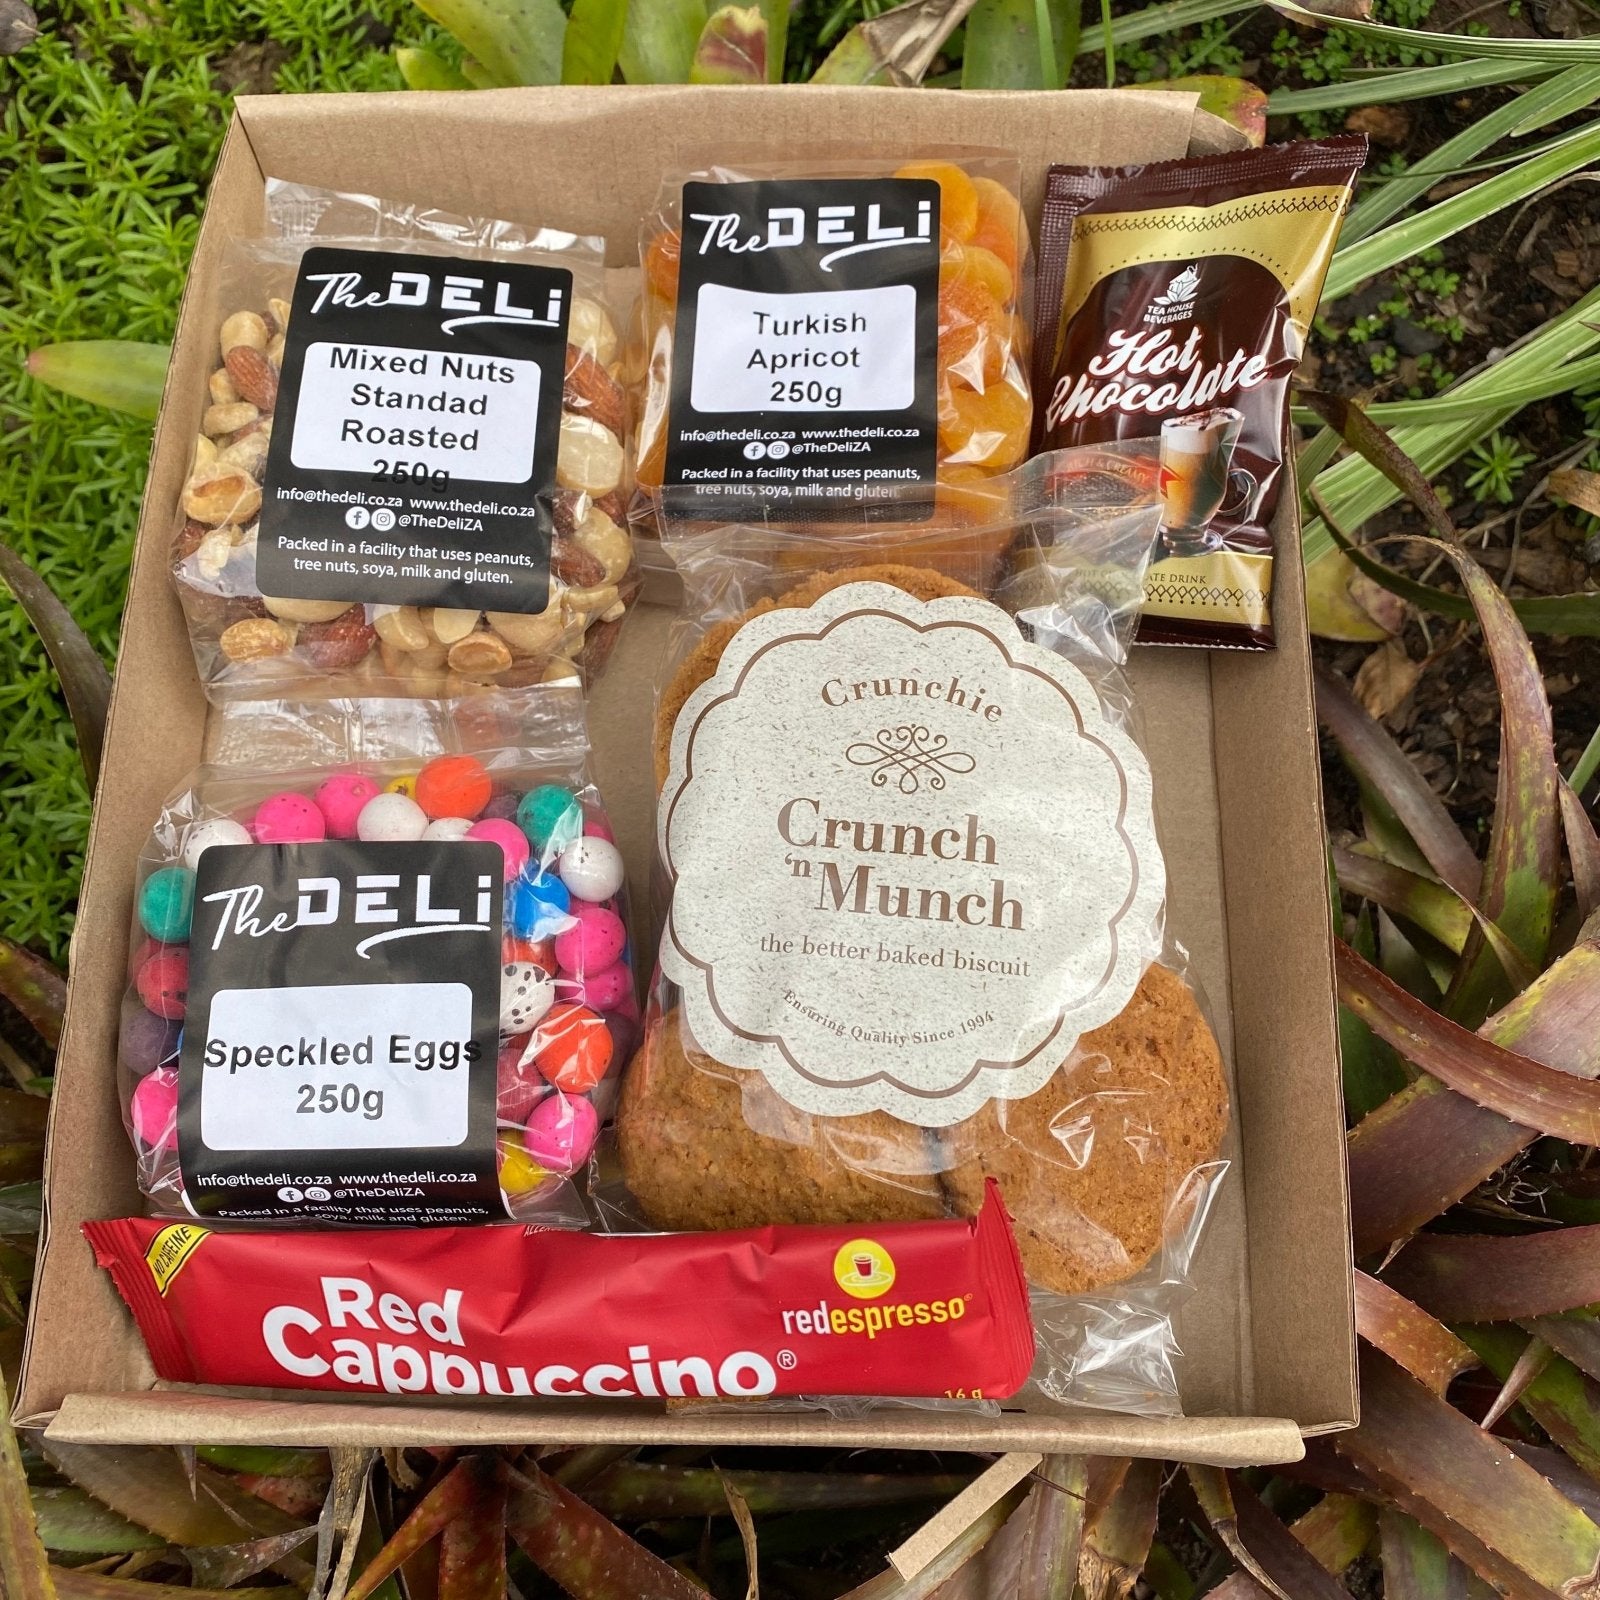 Our "Thinking of You" Love Box - The Deli